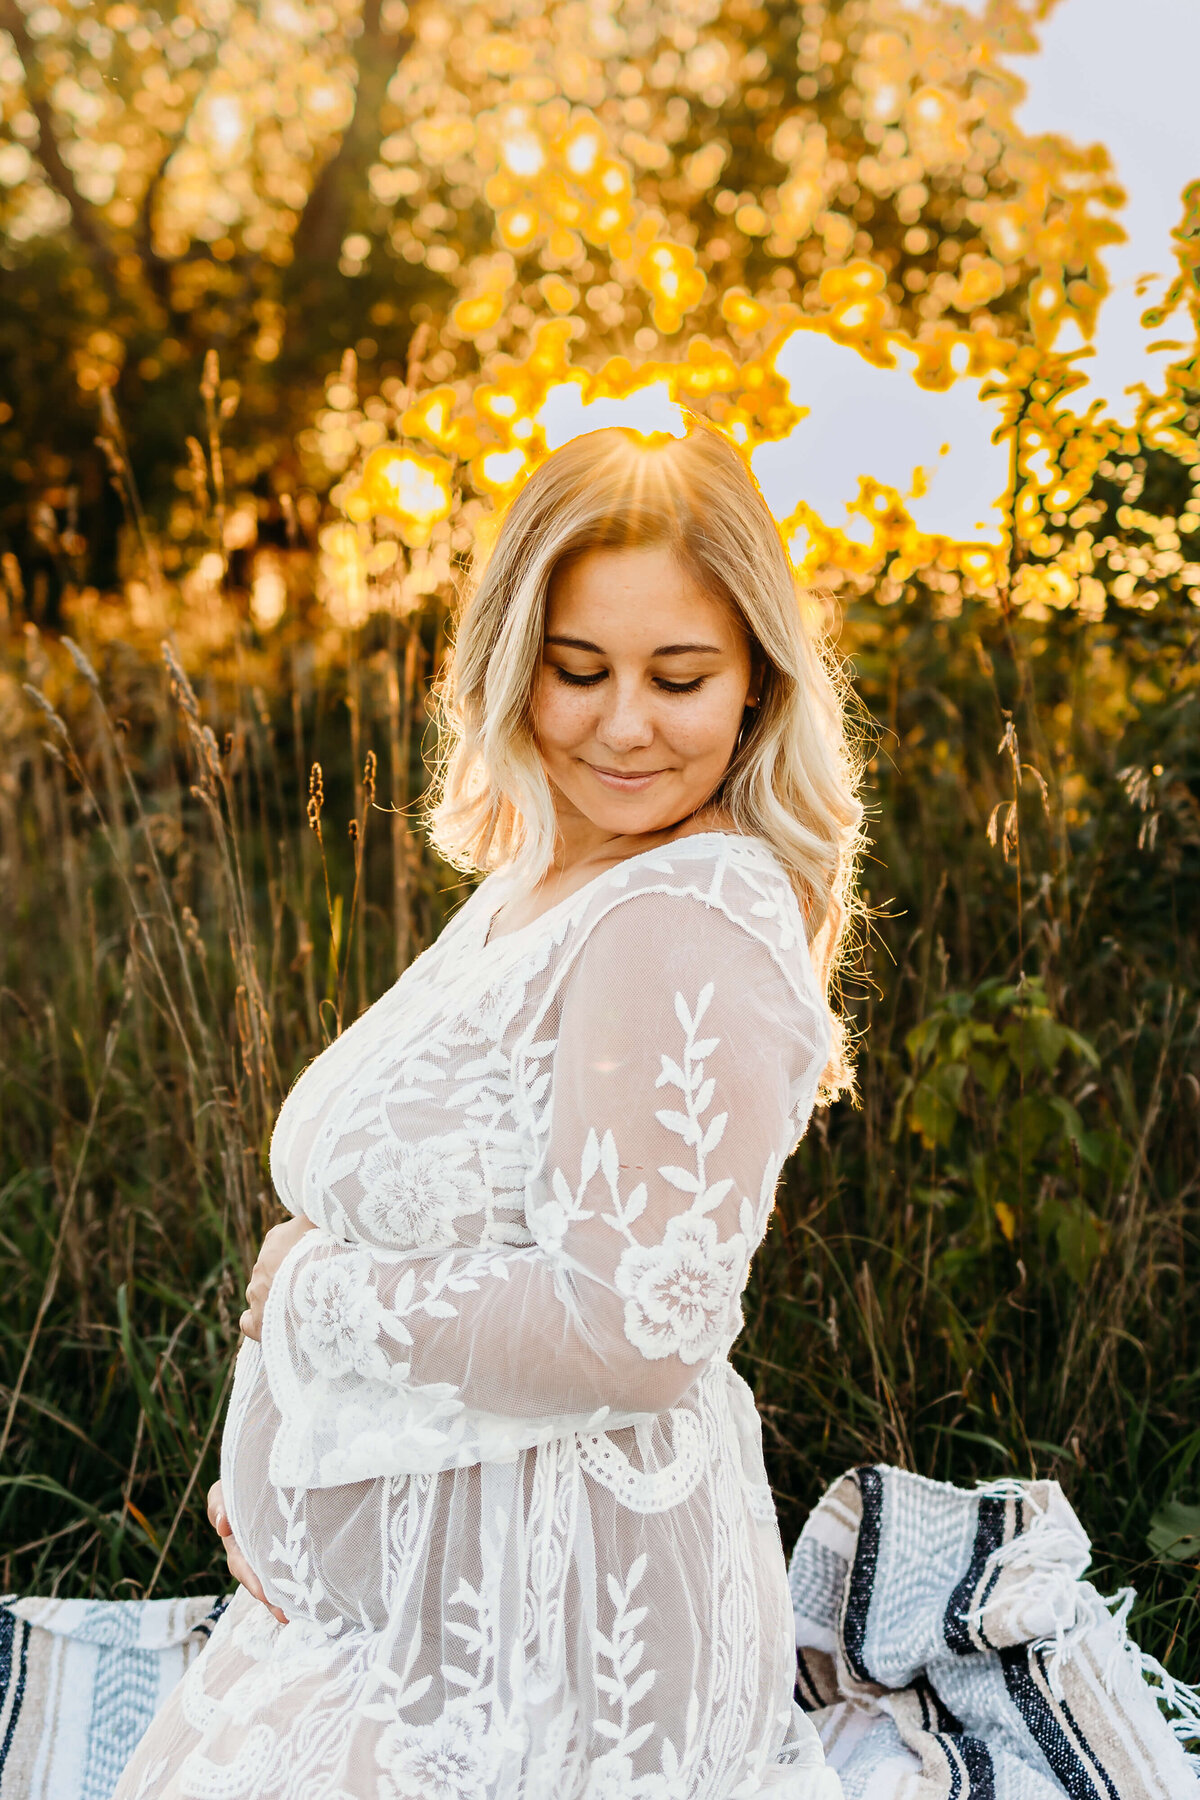 Mom to be in white dress golden hour field session